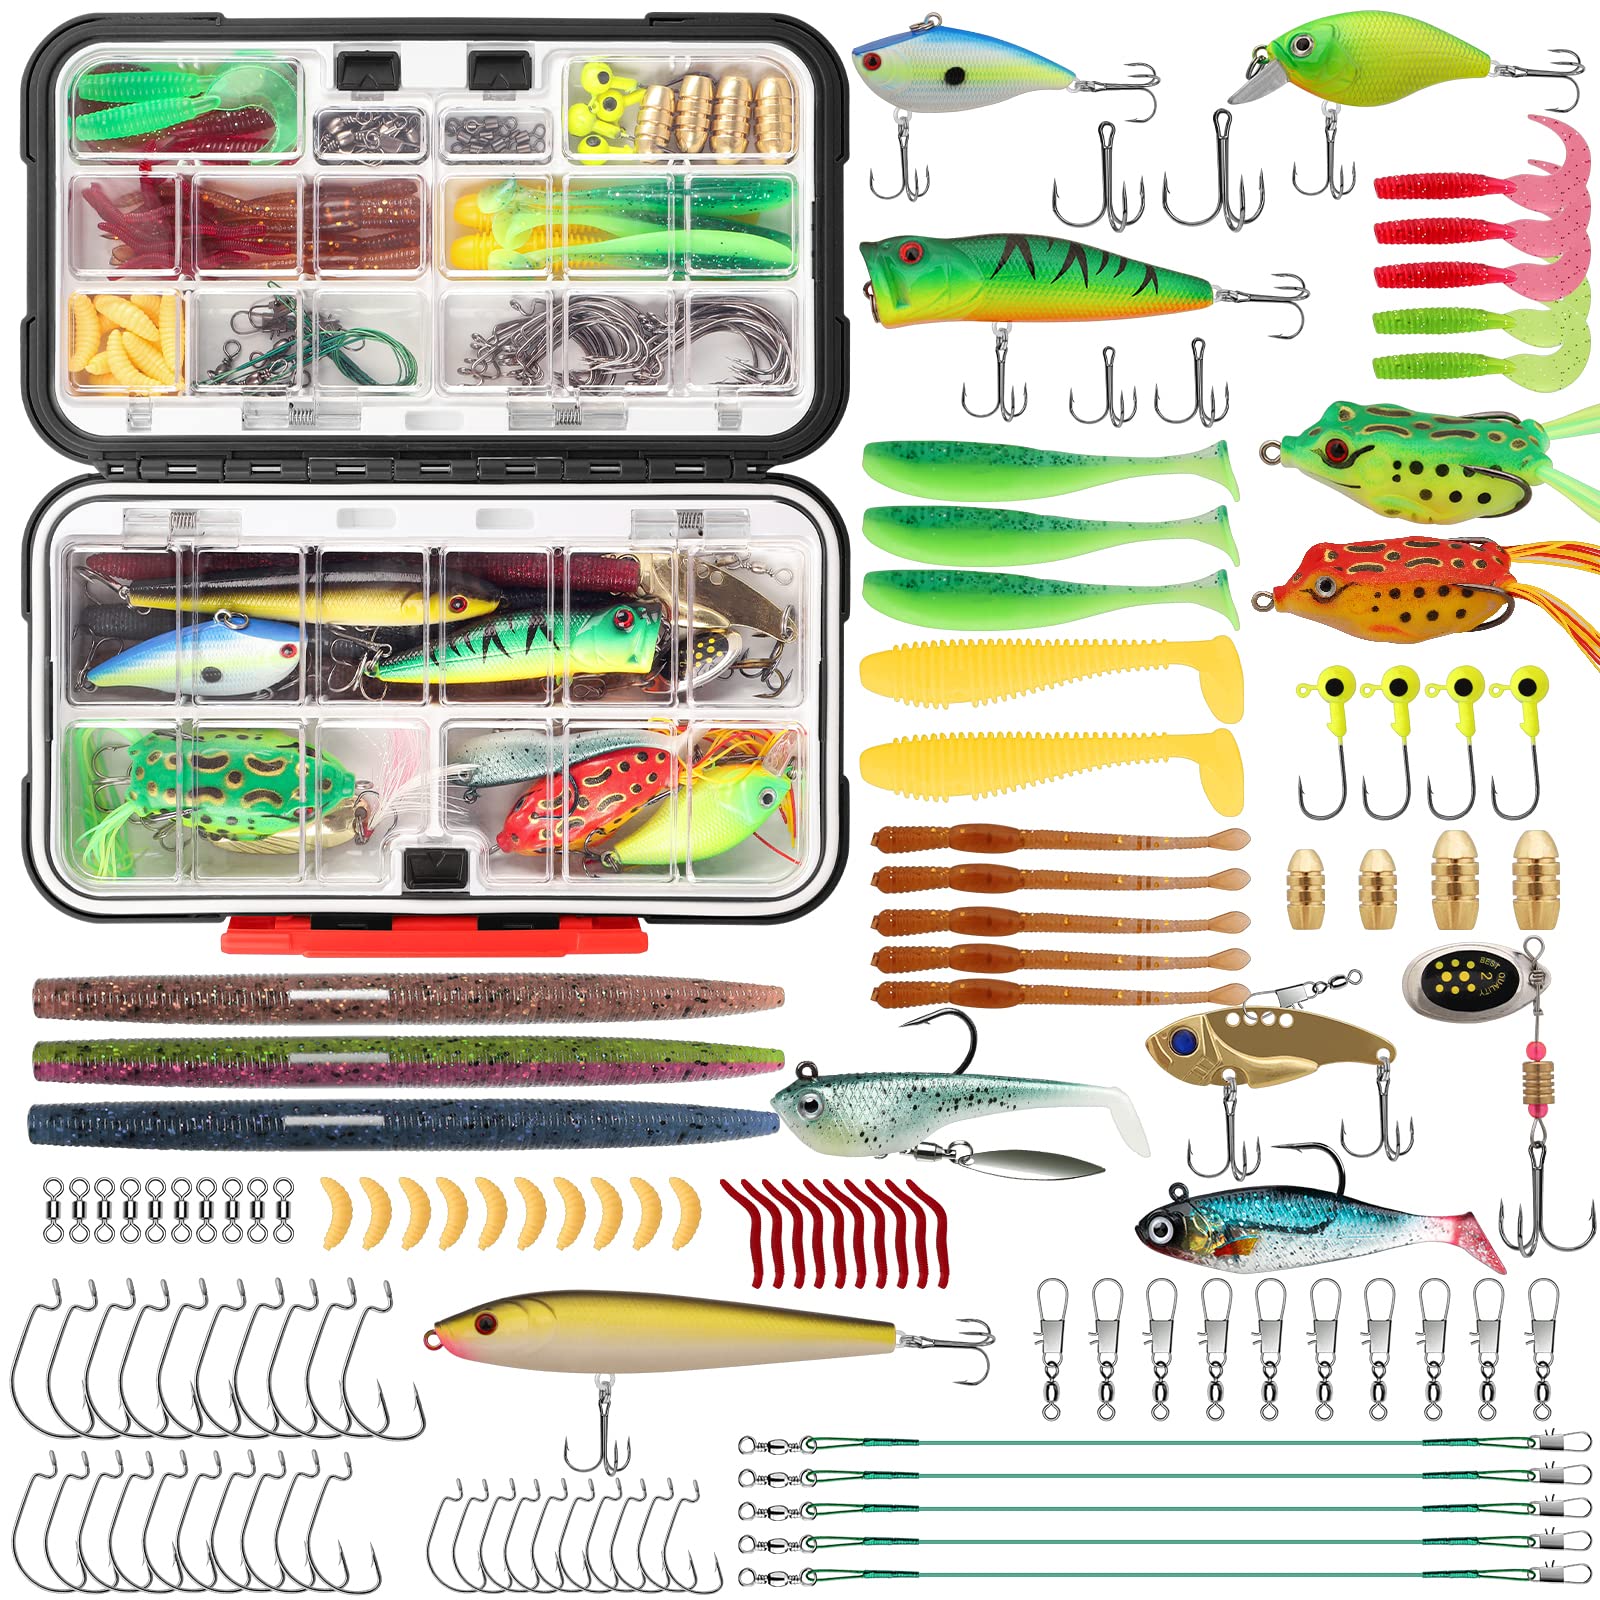  SMMYMGF Fishing Lures Tackle Box Kit,Saltwater